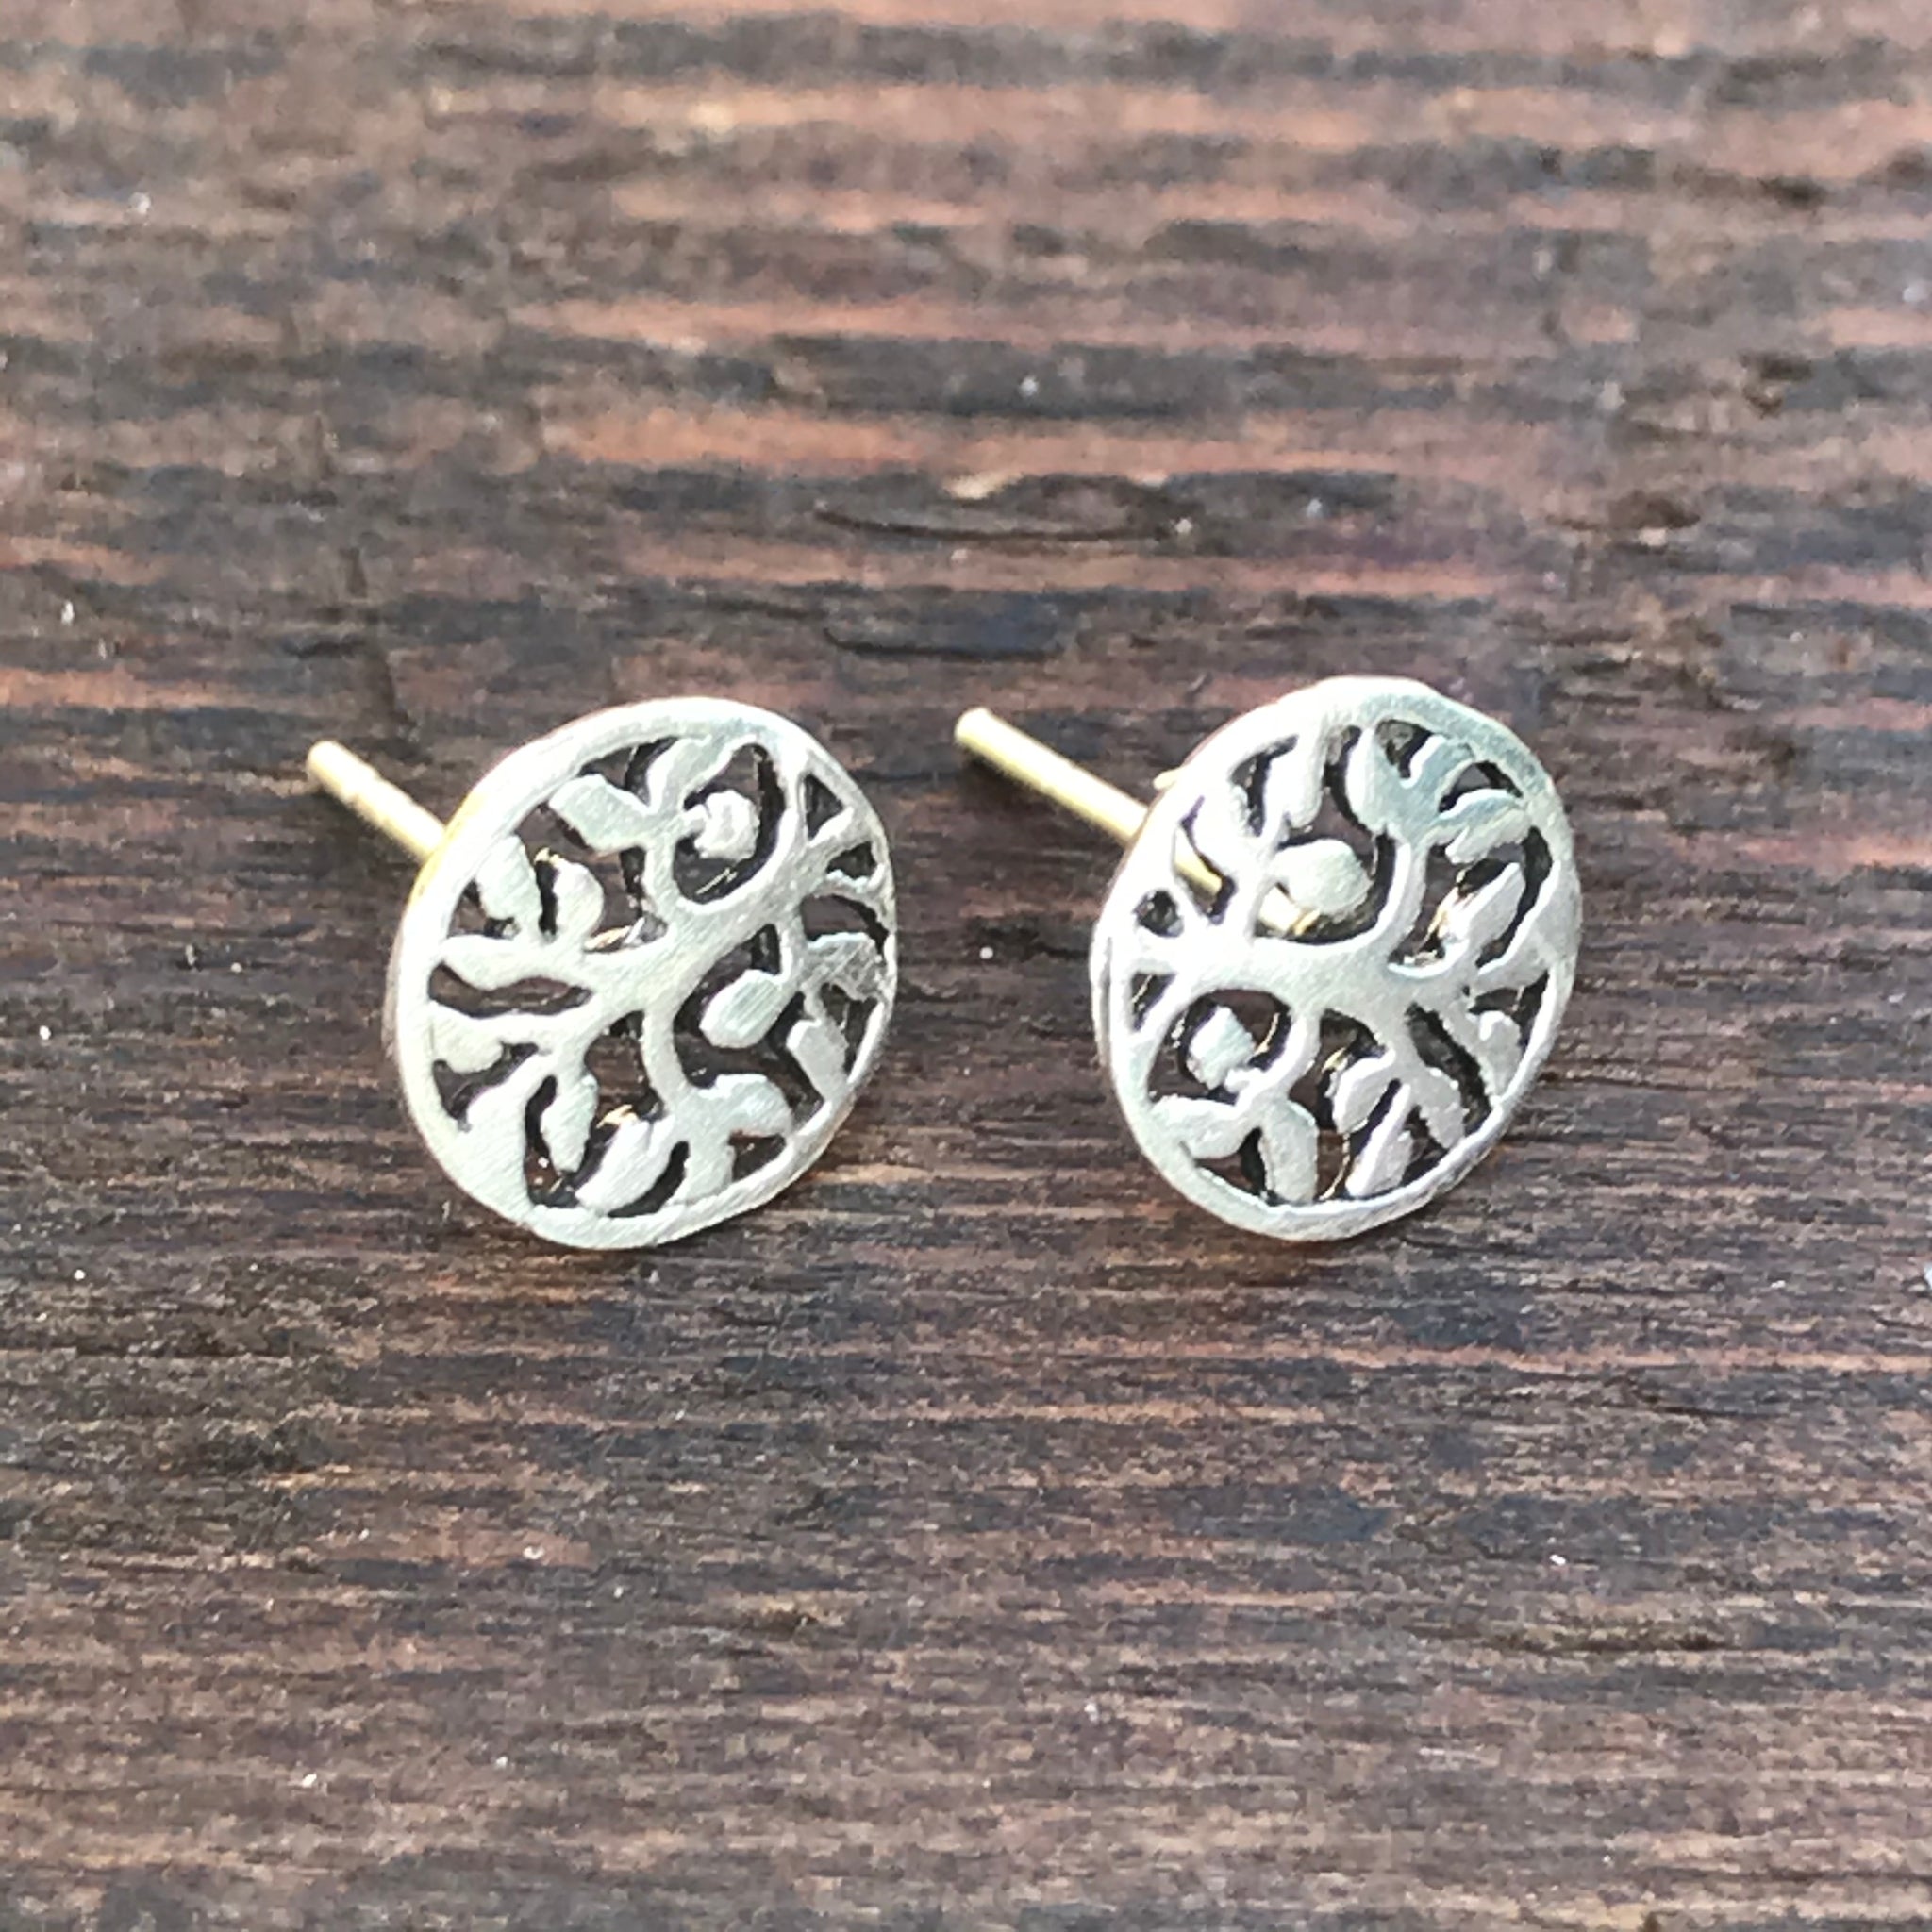 Sterling Silver 'Abstract Branch ' Design Stud Earrings